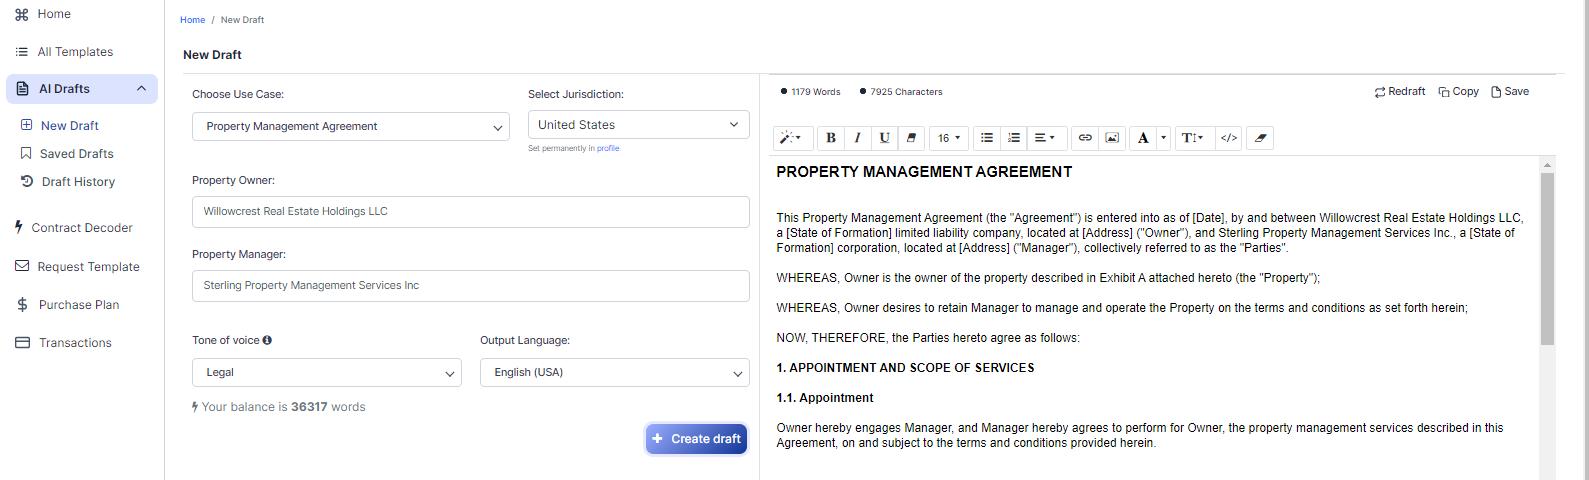 Property Management Agreement template